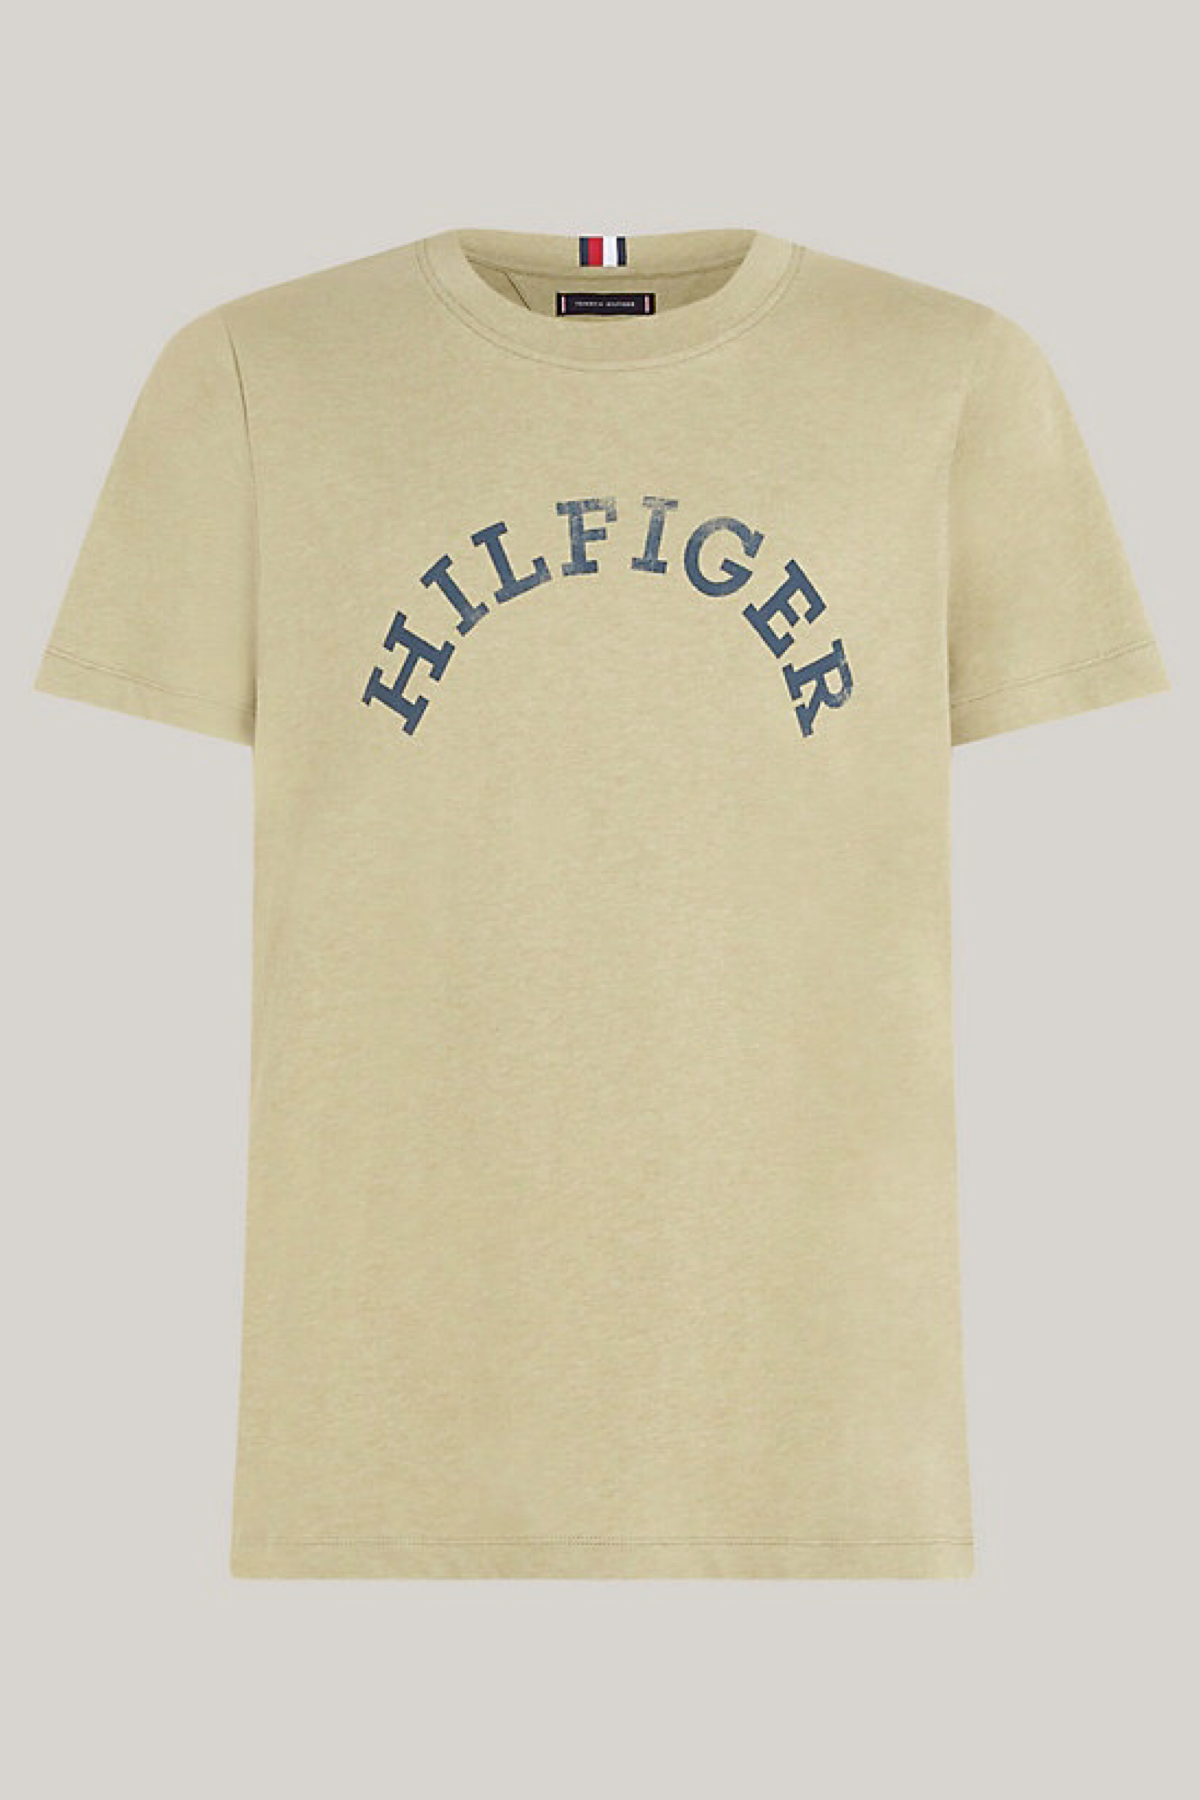 Tommy Hilfiger t-shirt monotype olive 34432